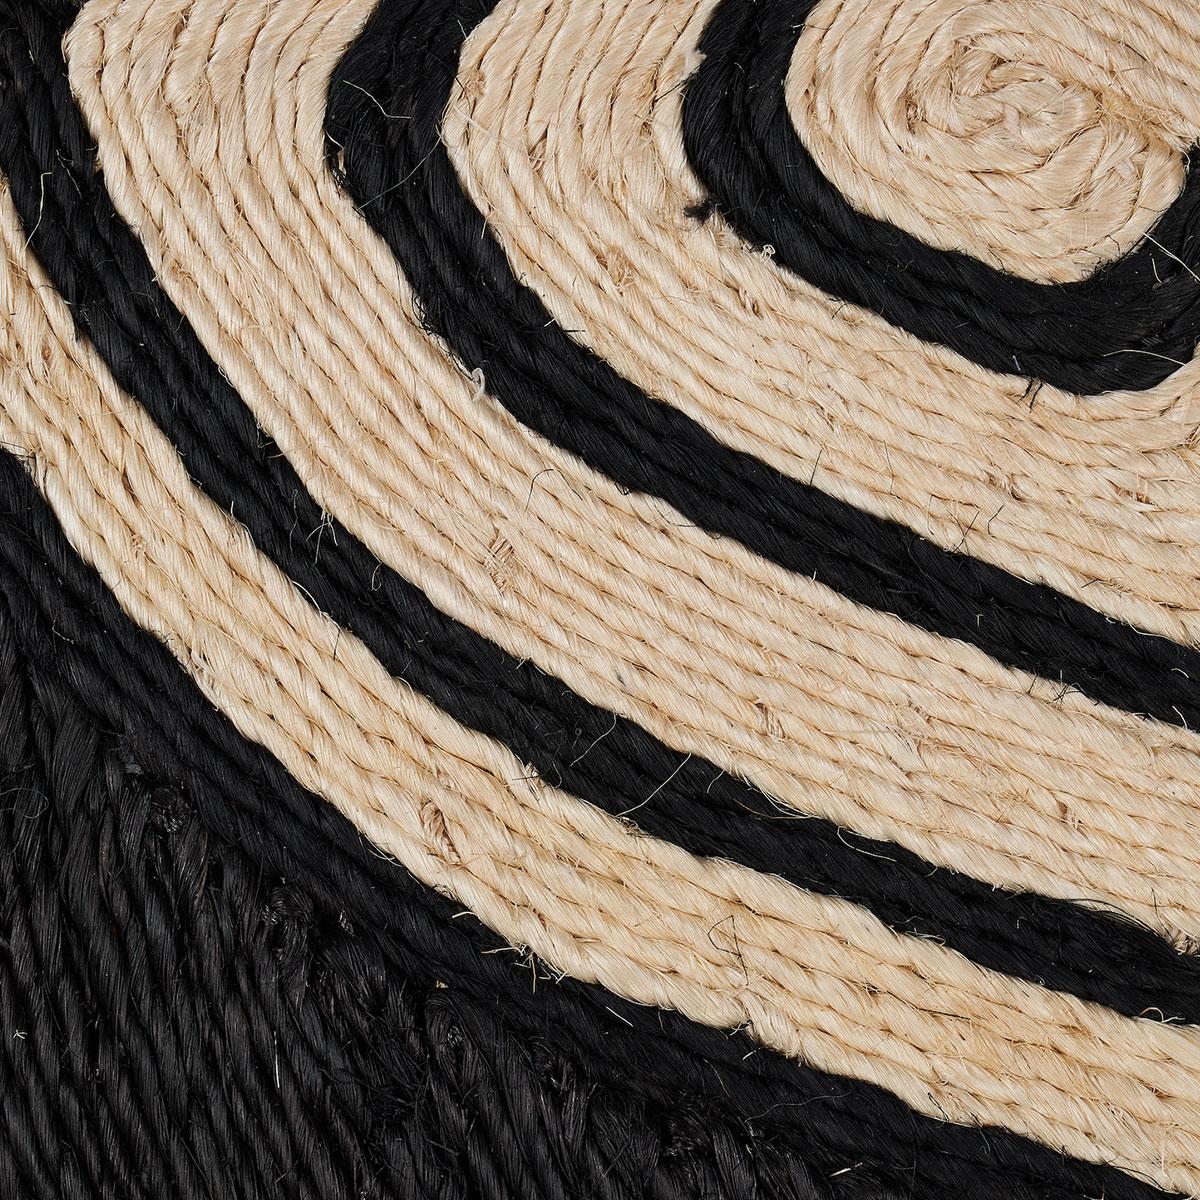 Designed by Adam Charlap Hyman and inspired by 17th-century cabinets of curiosity, the Tortuga rug is a playful take on a natural specimen. Hand-coiled abaca forms the tortoise’s limbs and shell, giving this rug a fun graphic